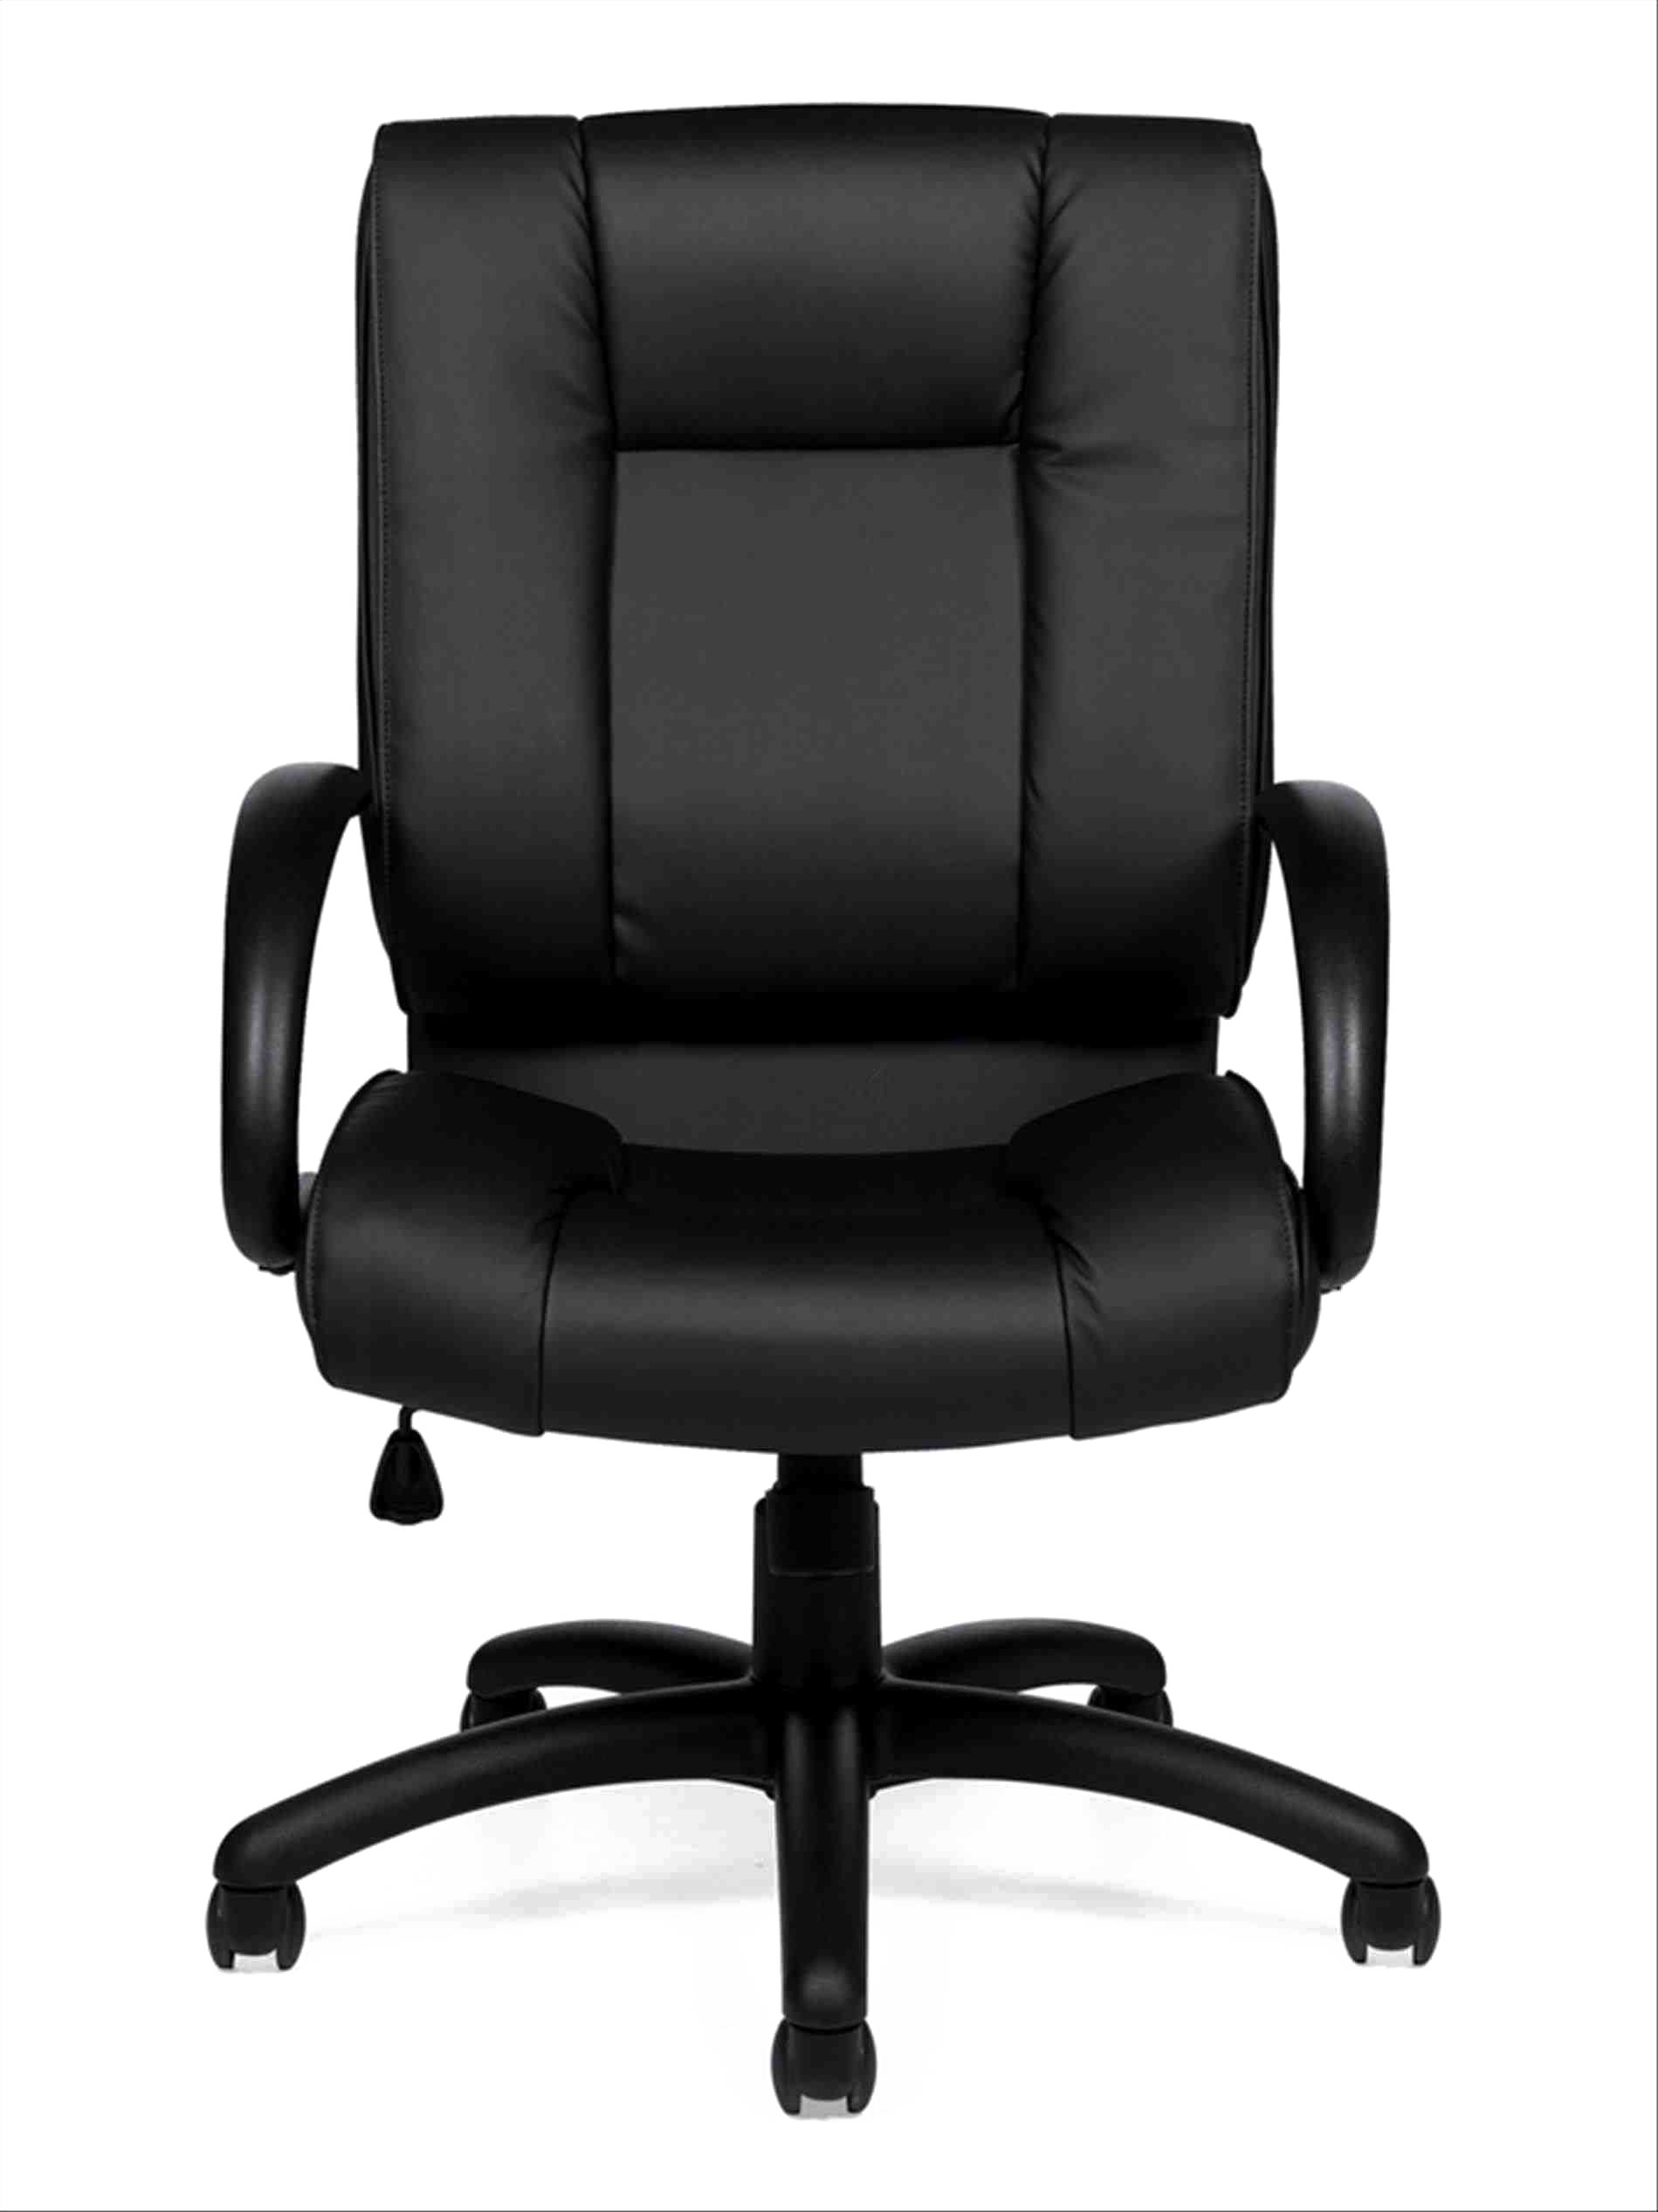 Download Office Chair Image Free Photo PNG HQ PNG Image | FreePNGImg